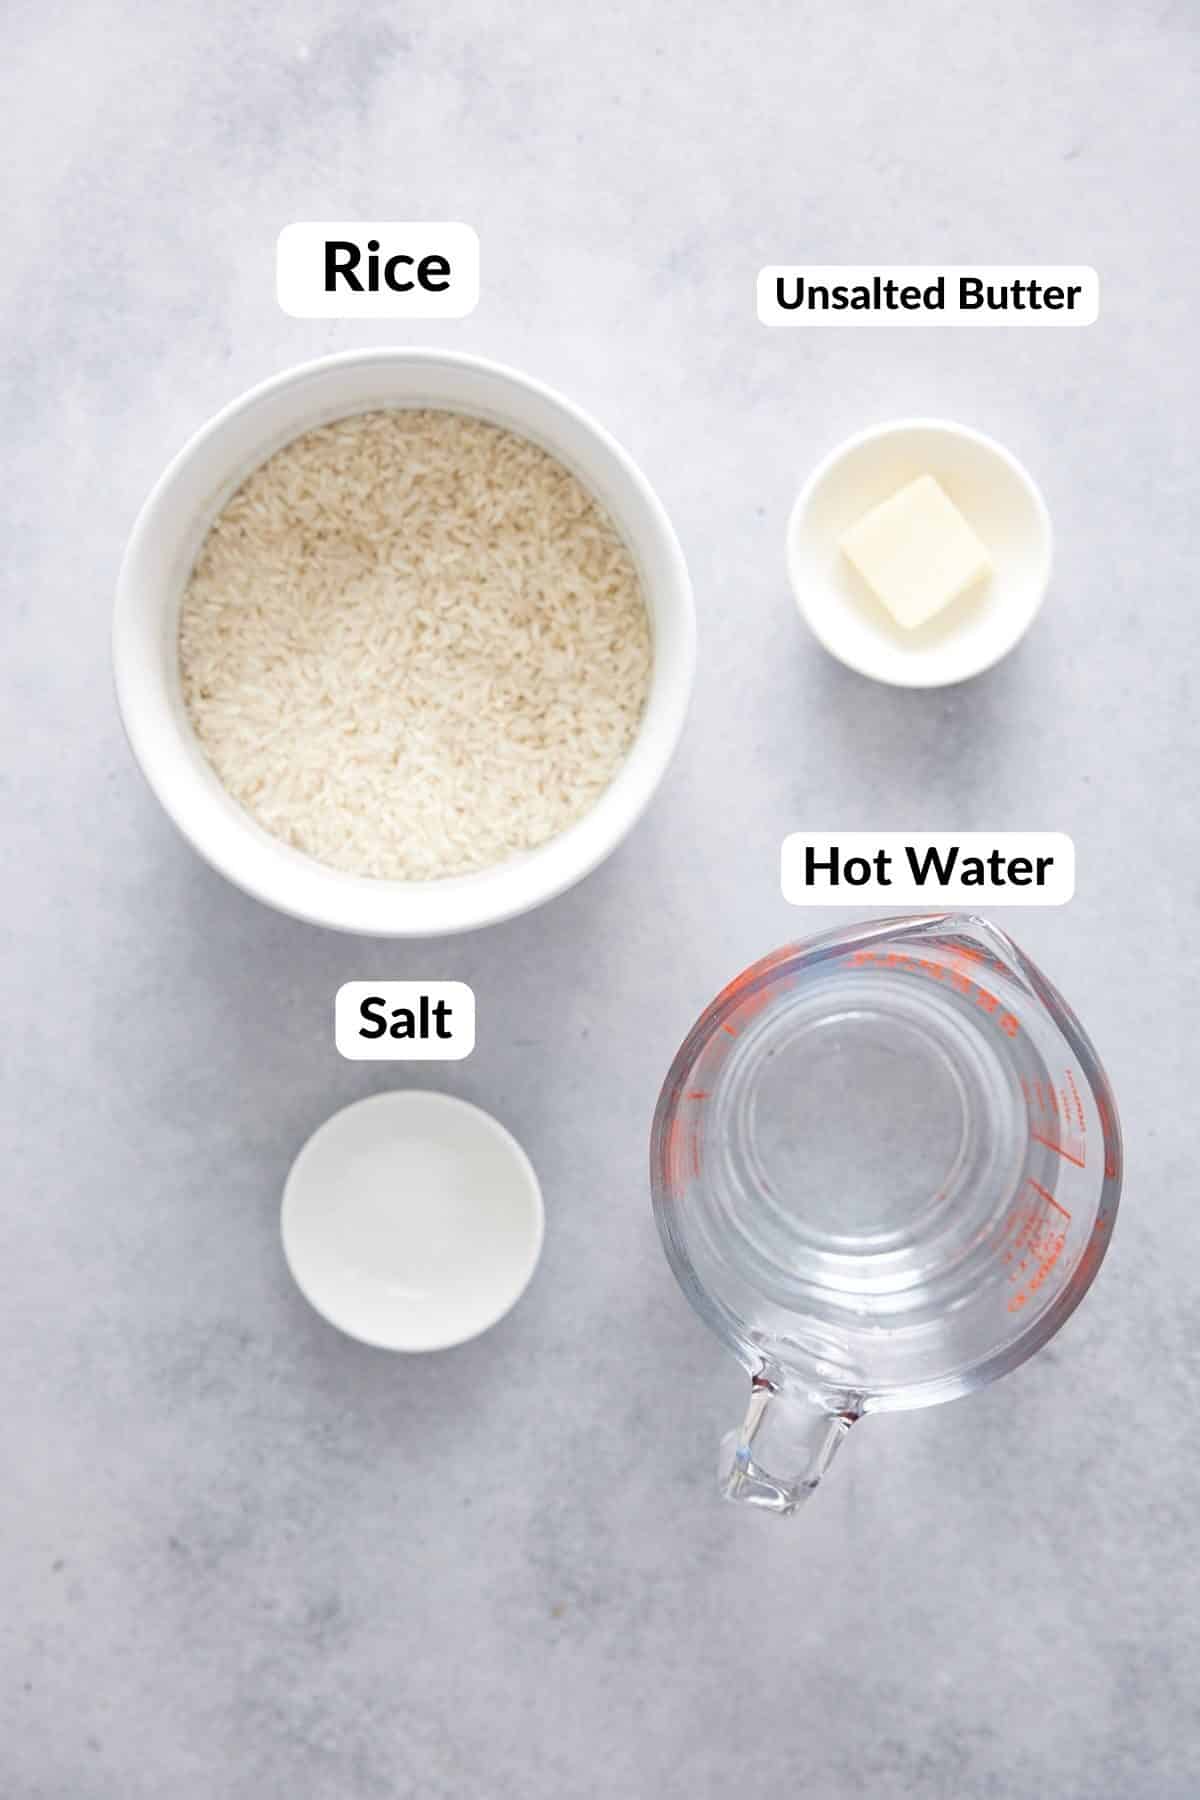 ingredients for oven baked rice with text naming the rice, hot water, butter, and salt